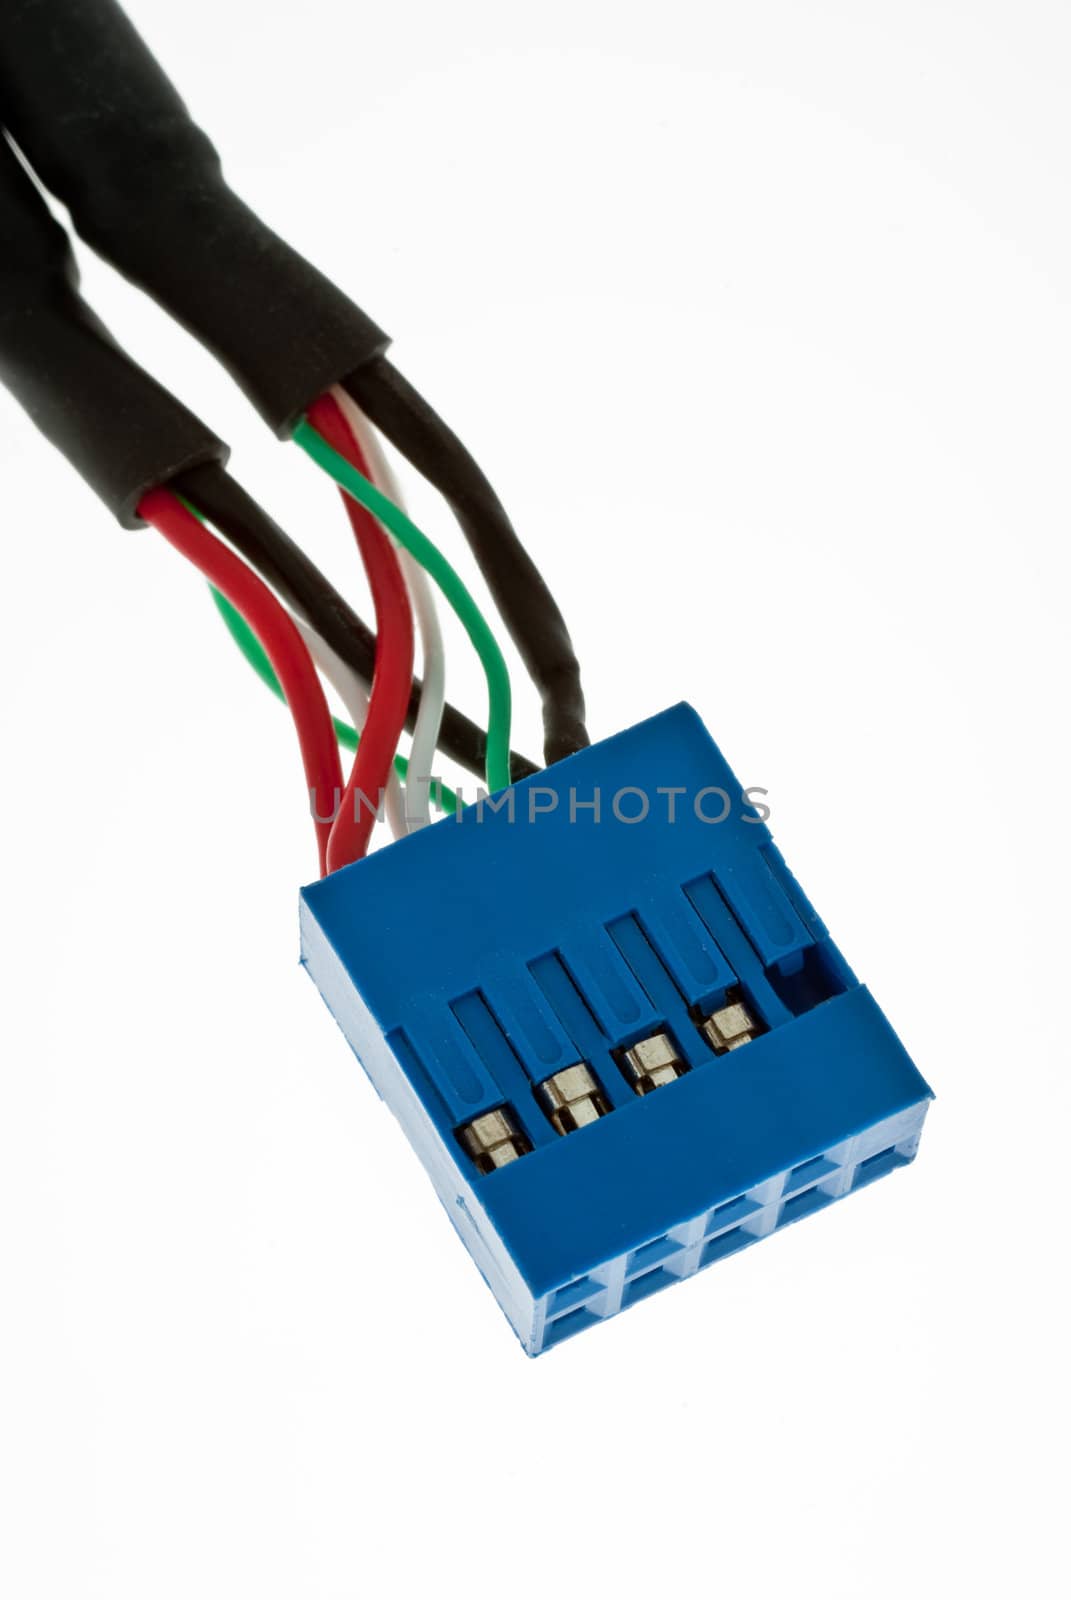 Blue connector for extra USB on computer motherboard